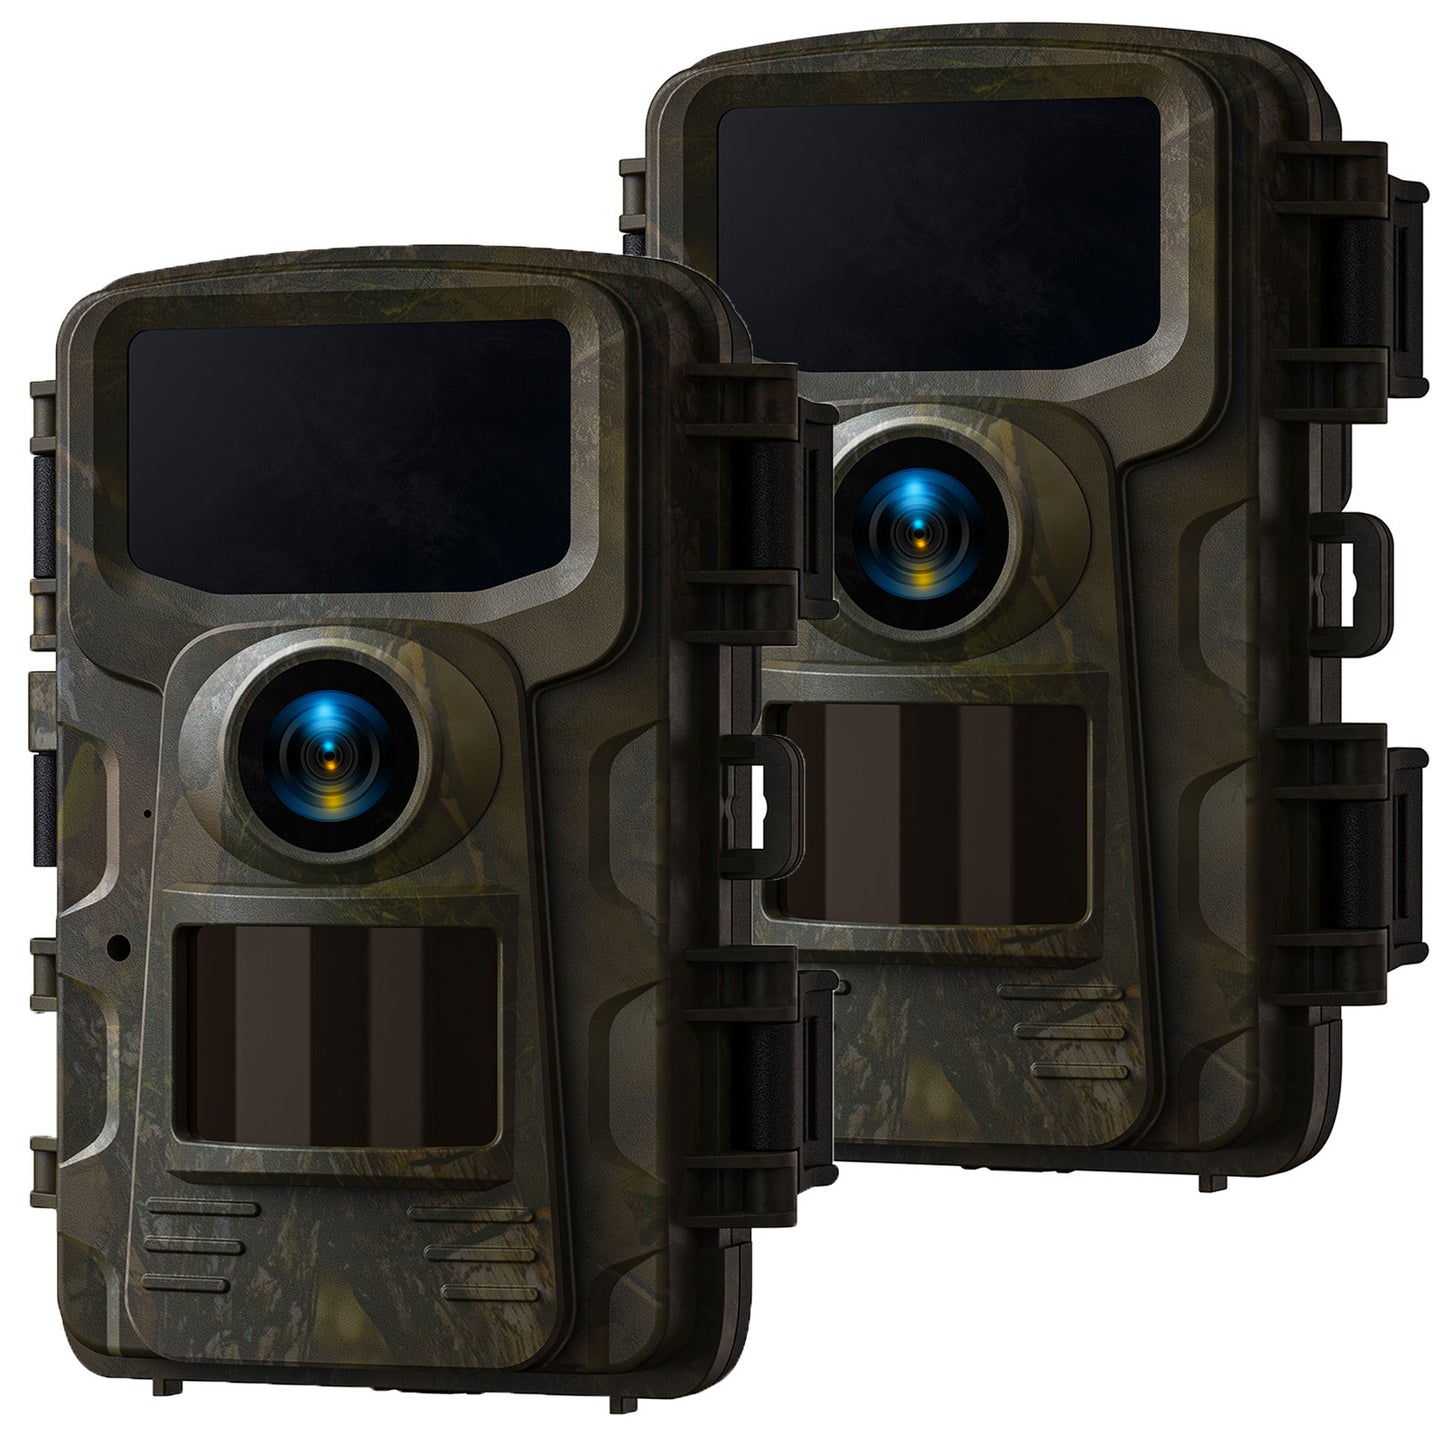 CAMPARK 2 Pack Trail Camera, 2K 36MP Game Camera with Night Vision Motion Activated Waterproof 120°Wide-Angle, Hunting Trail Cam with 850nm Night Vision Infrared LED 2.0"LCD for Wildlife Monitoring